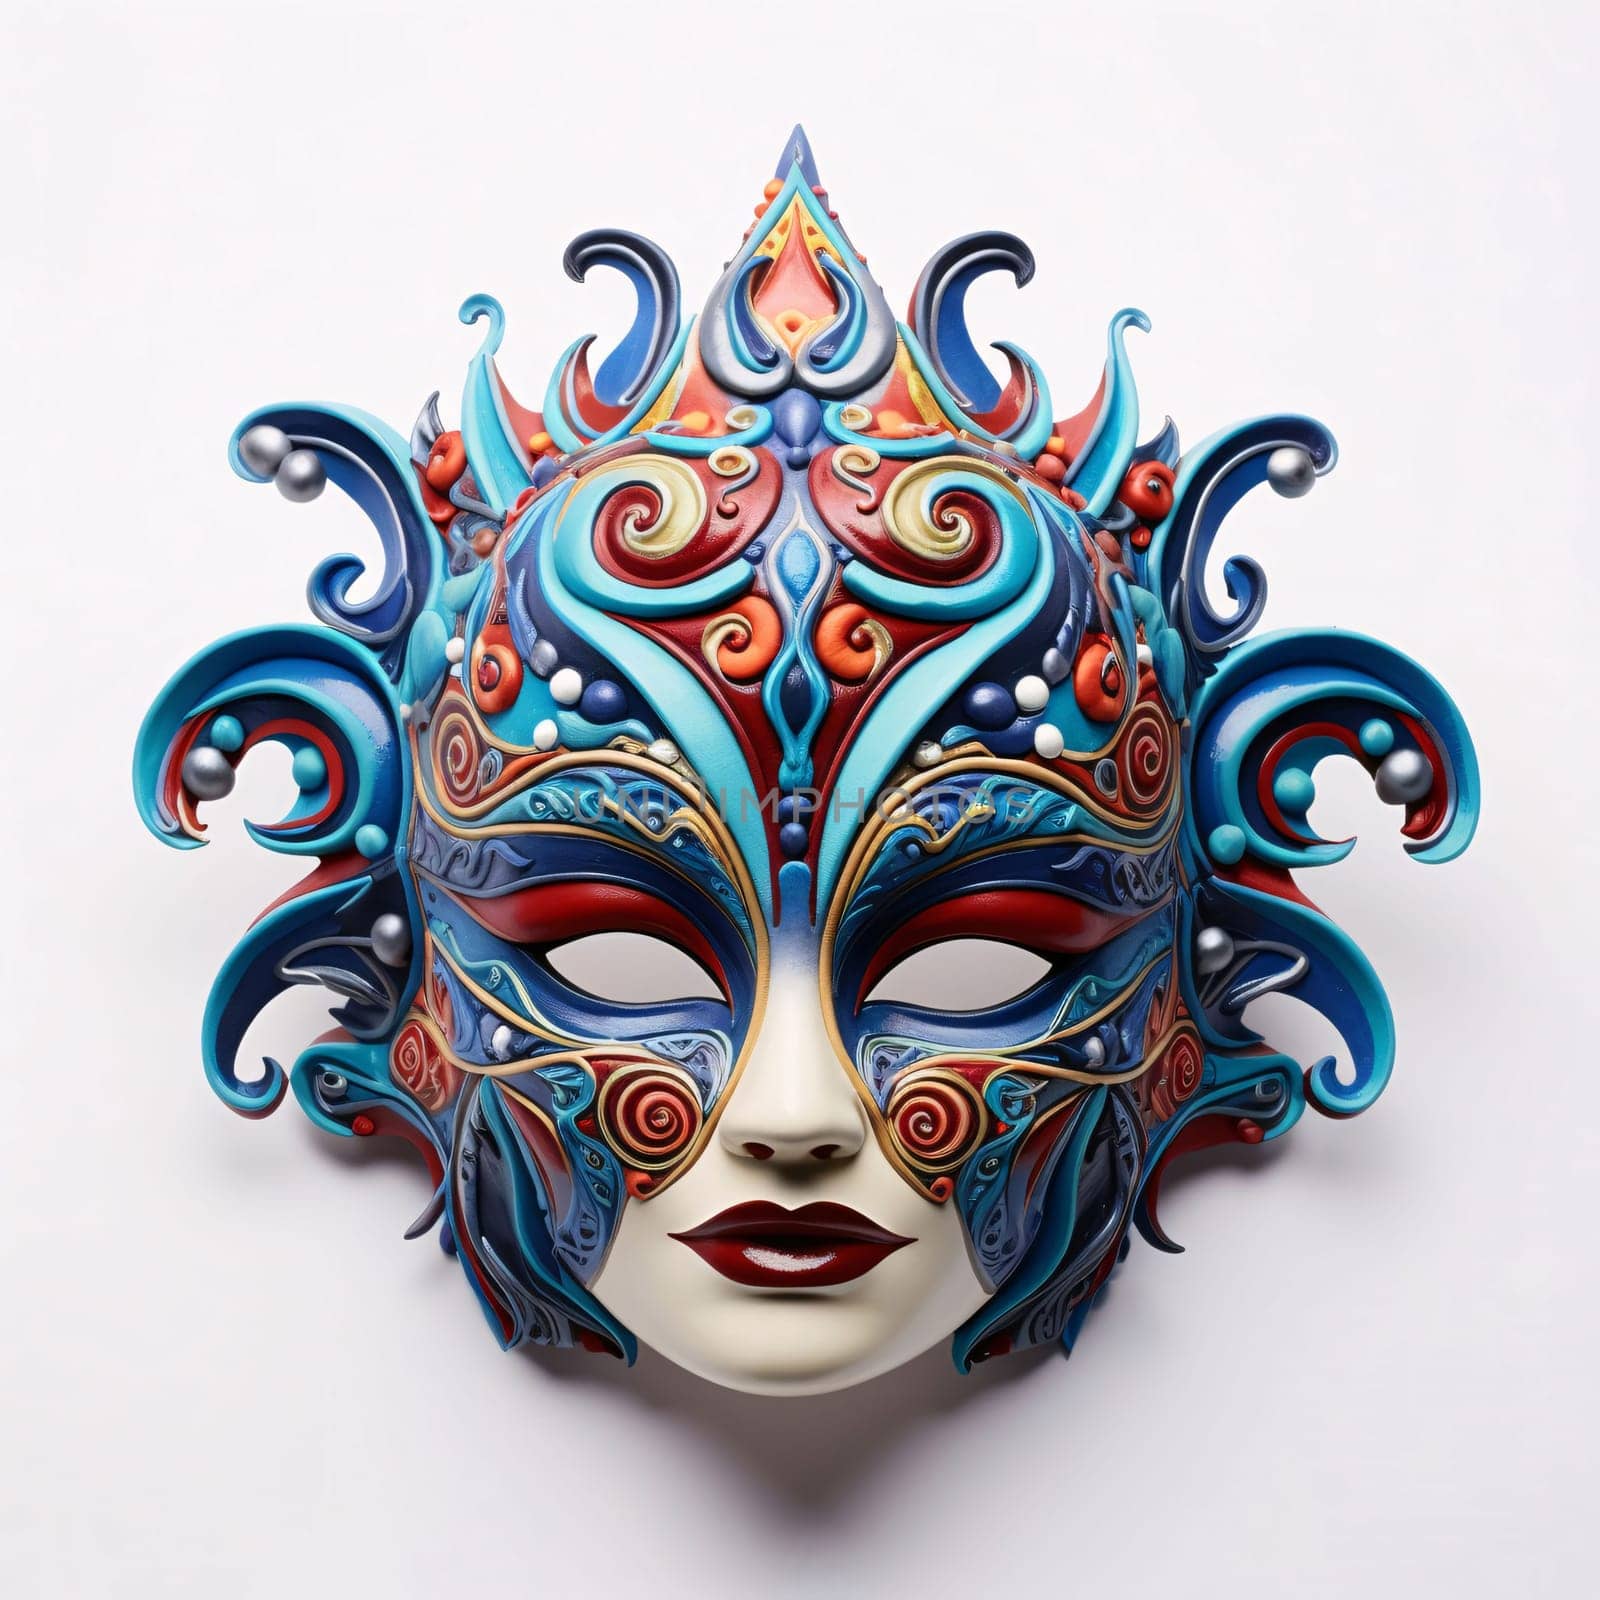 Carnival mask with blue, red decorations, white background. Carnival outfits, masks and decorations. A time of fun and celebration before the fast.